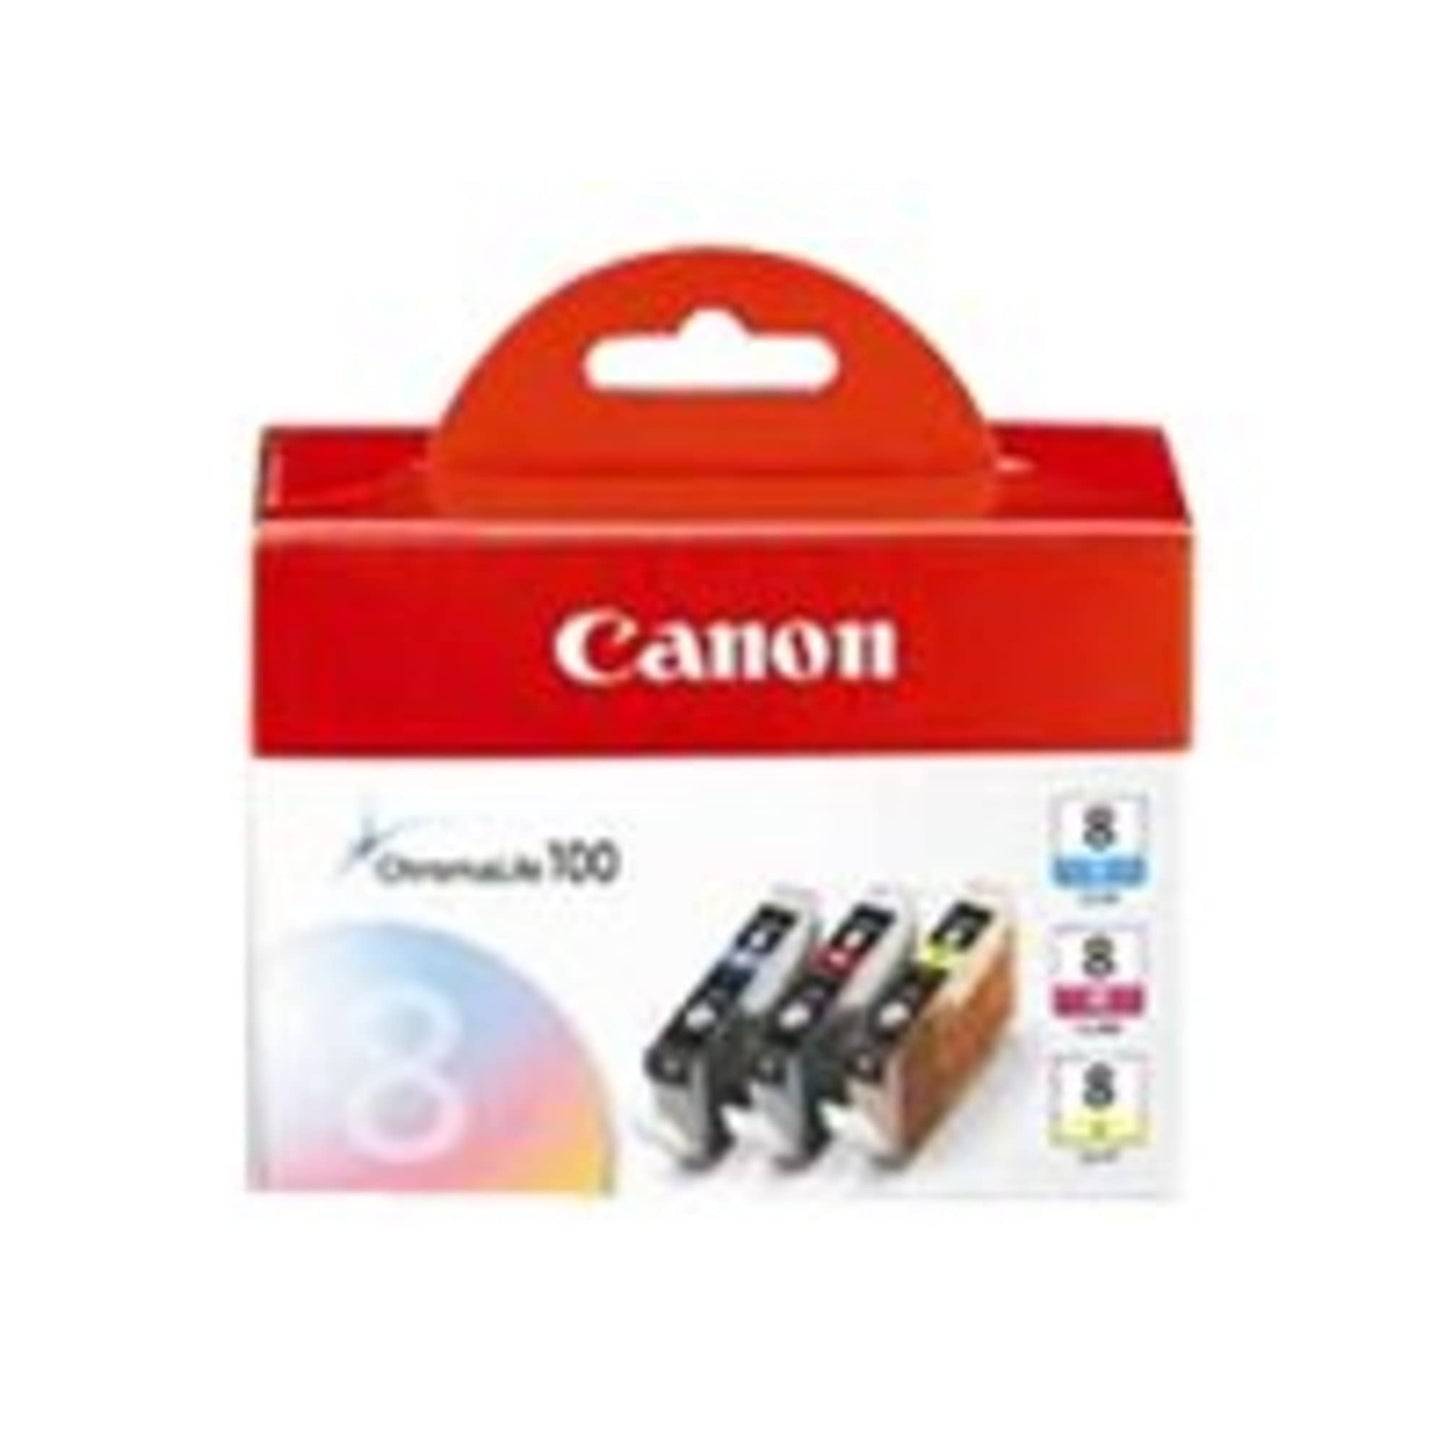 Canon CLI-8 3 Color Ink Tank Compatible to Pro9000, Pro9000 Mark II, iP6700D, iP6600D, iP5200R, iP5200, iP4200, iP4500, iP4300, iP3500 and iP3300,